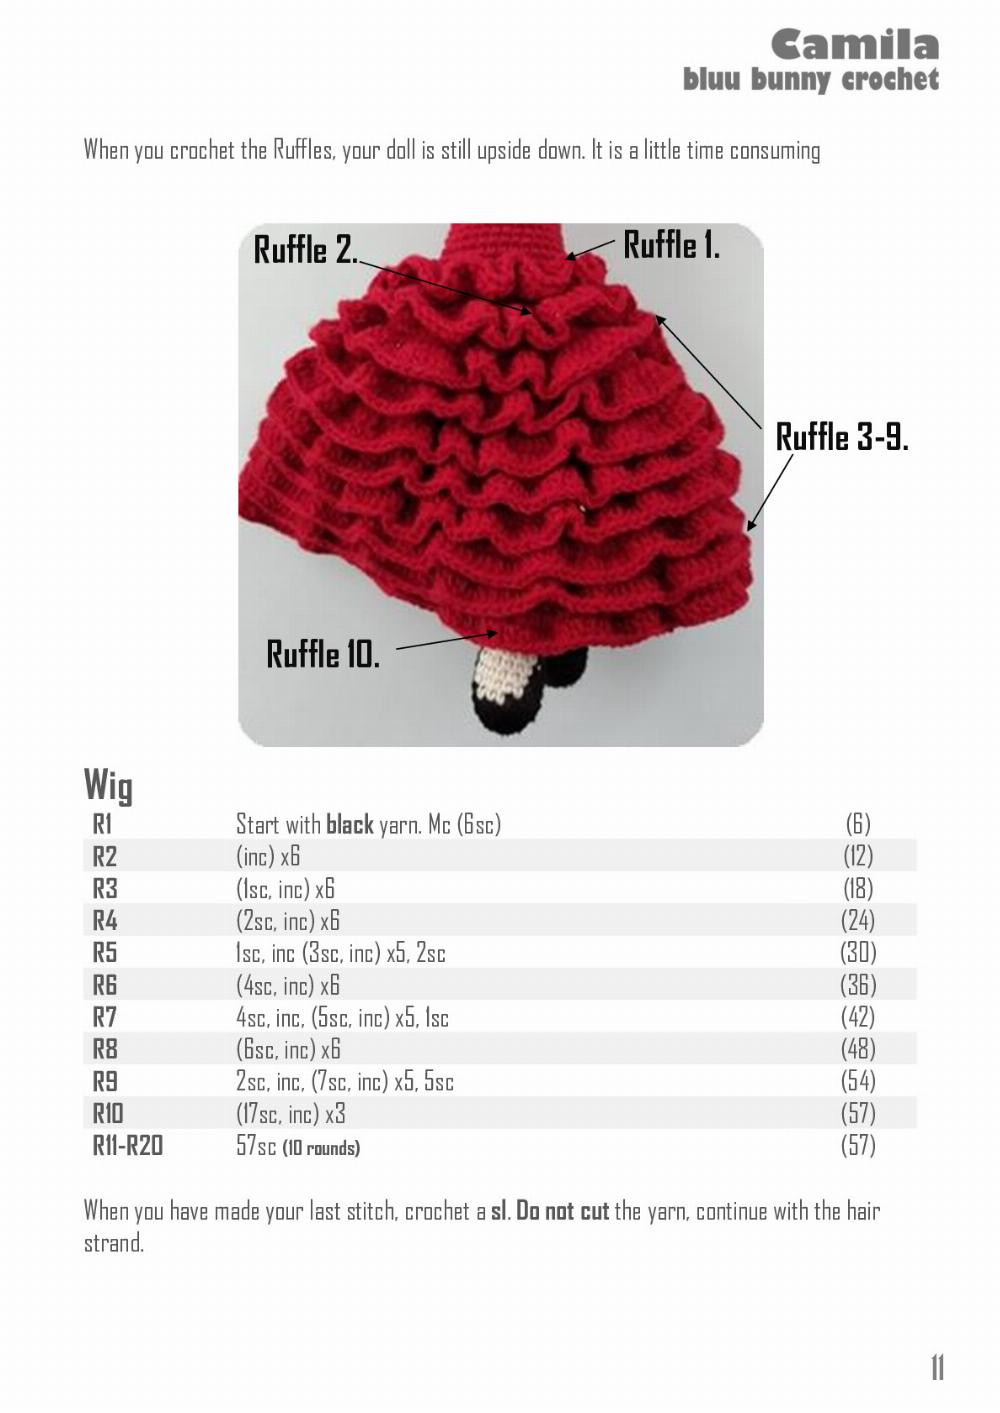 Crochet pattern for a girl doll wearing a red dress and black hair